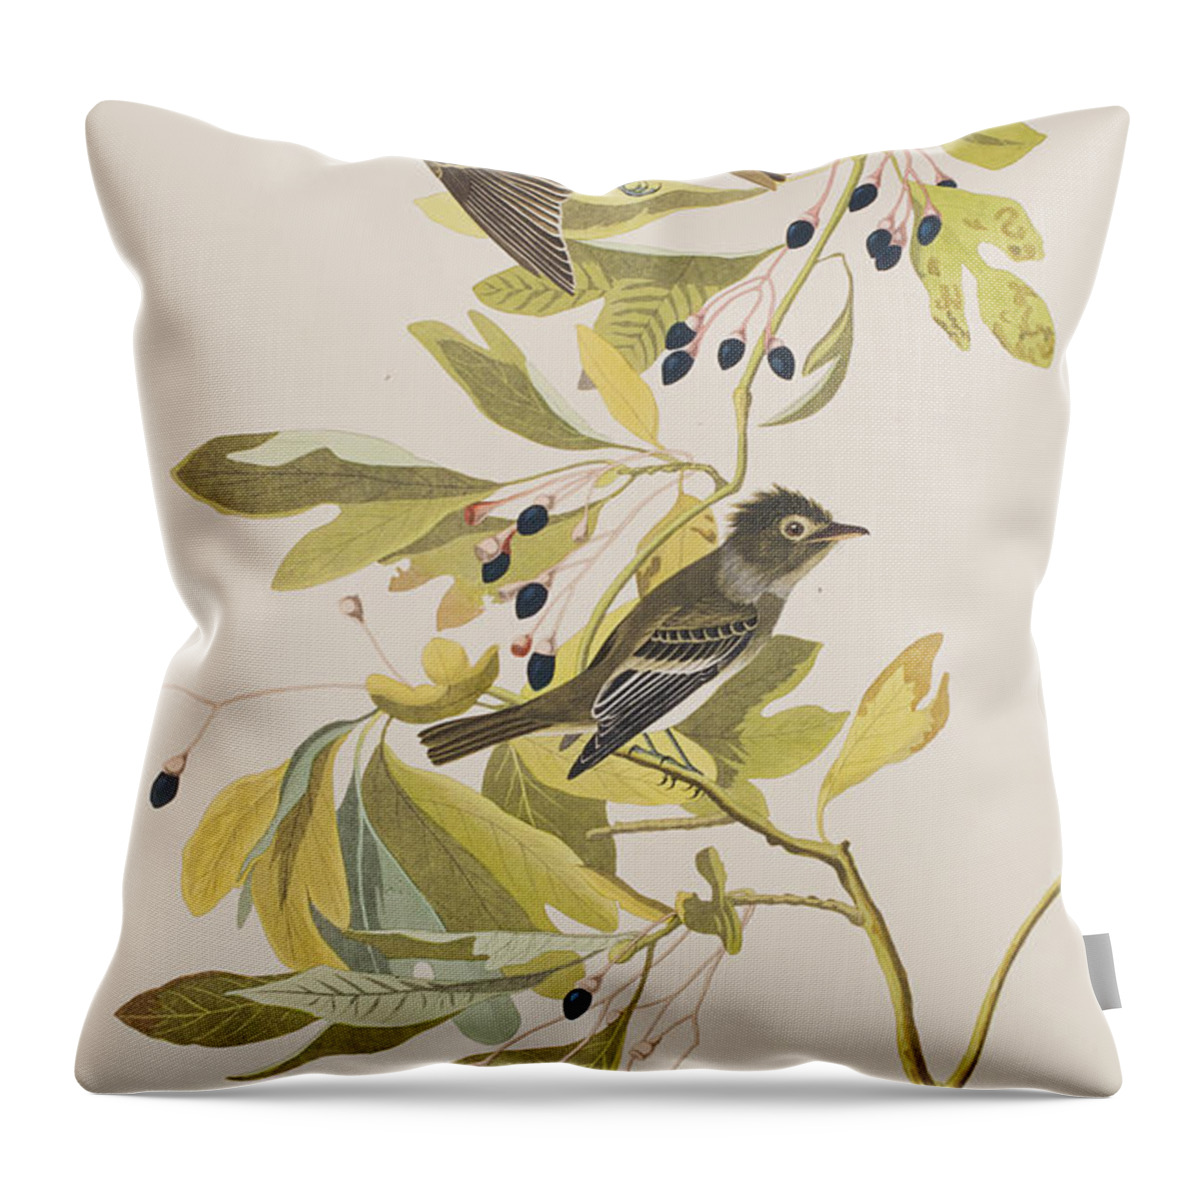 Flycatcher Throw Pillow featuring the painting Small Green Crested Flycatcher by John James Audubon